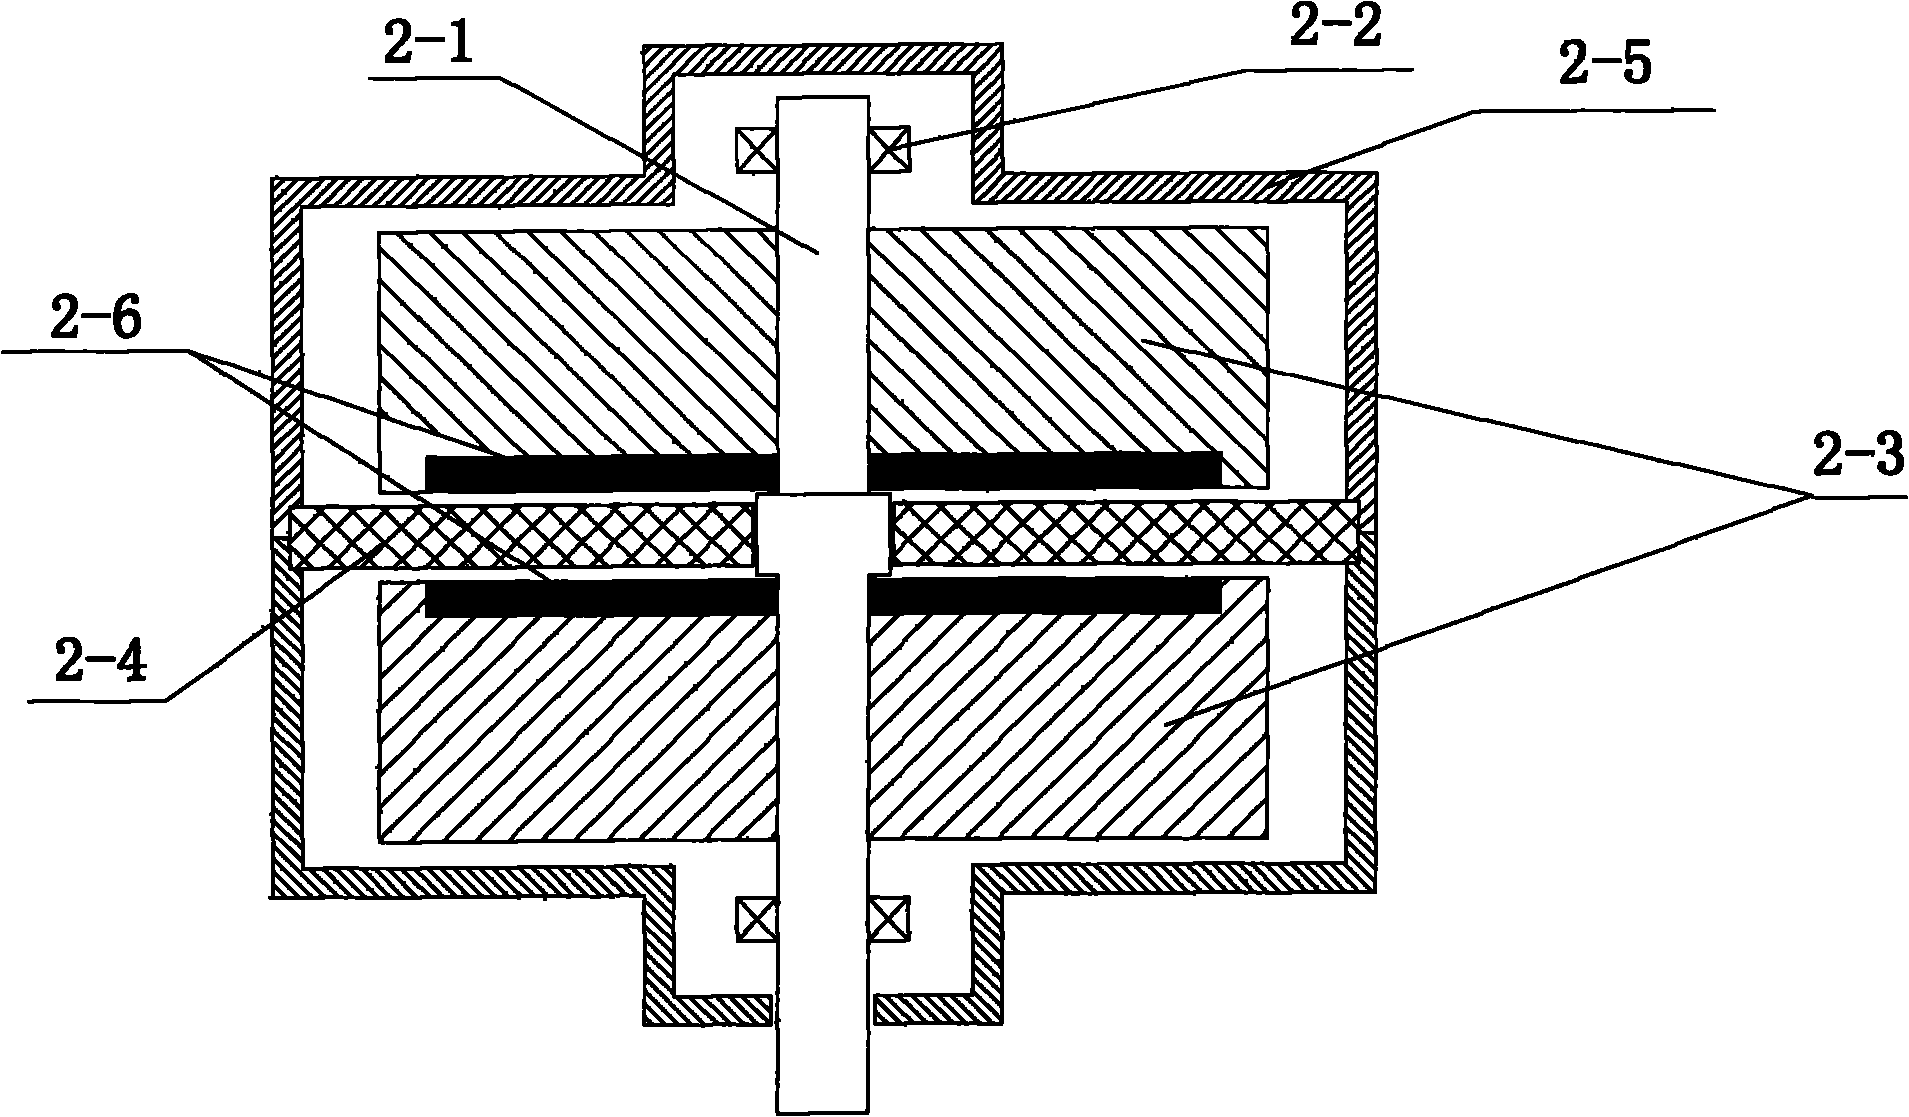 Vehicle exhaust waste heat generating system